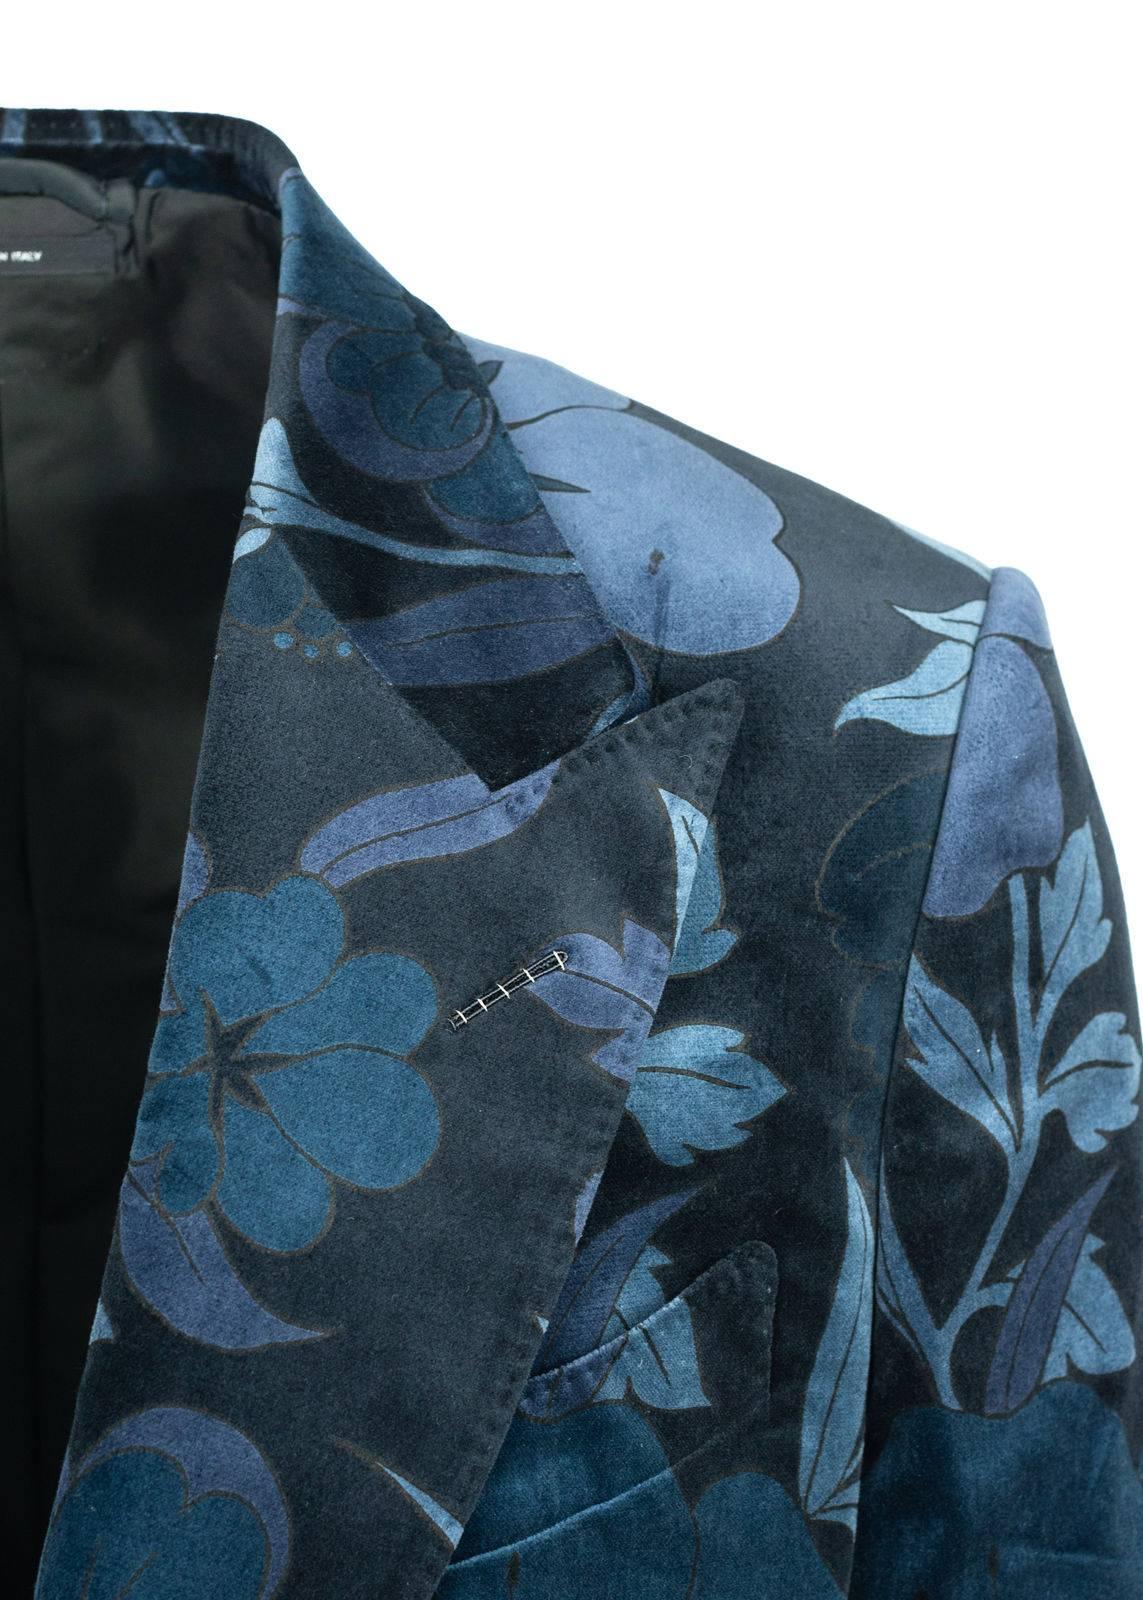 Tom Ford Mens Dark Blue Floral Velvet Shelton Jacket Sz 52R/42R RTL$4640 In Excellent Condition For Sale In Brooklyn, NY